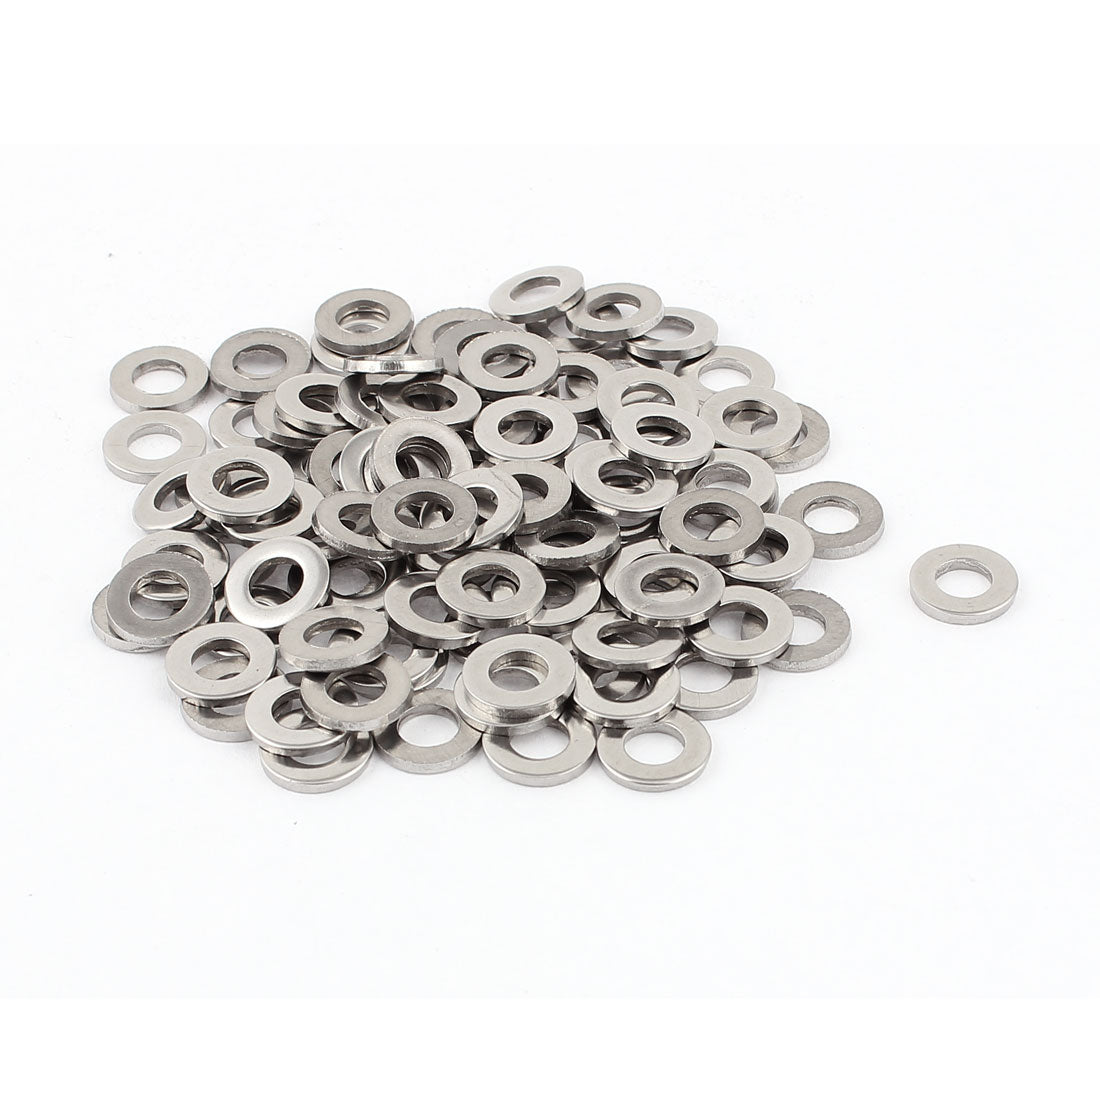 uxcell Uxcell 100Pcs M6 x 12mm x 1.5mm 304 Stainless Steel Flat Washer for Screw Bolt